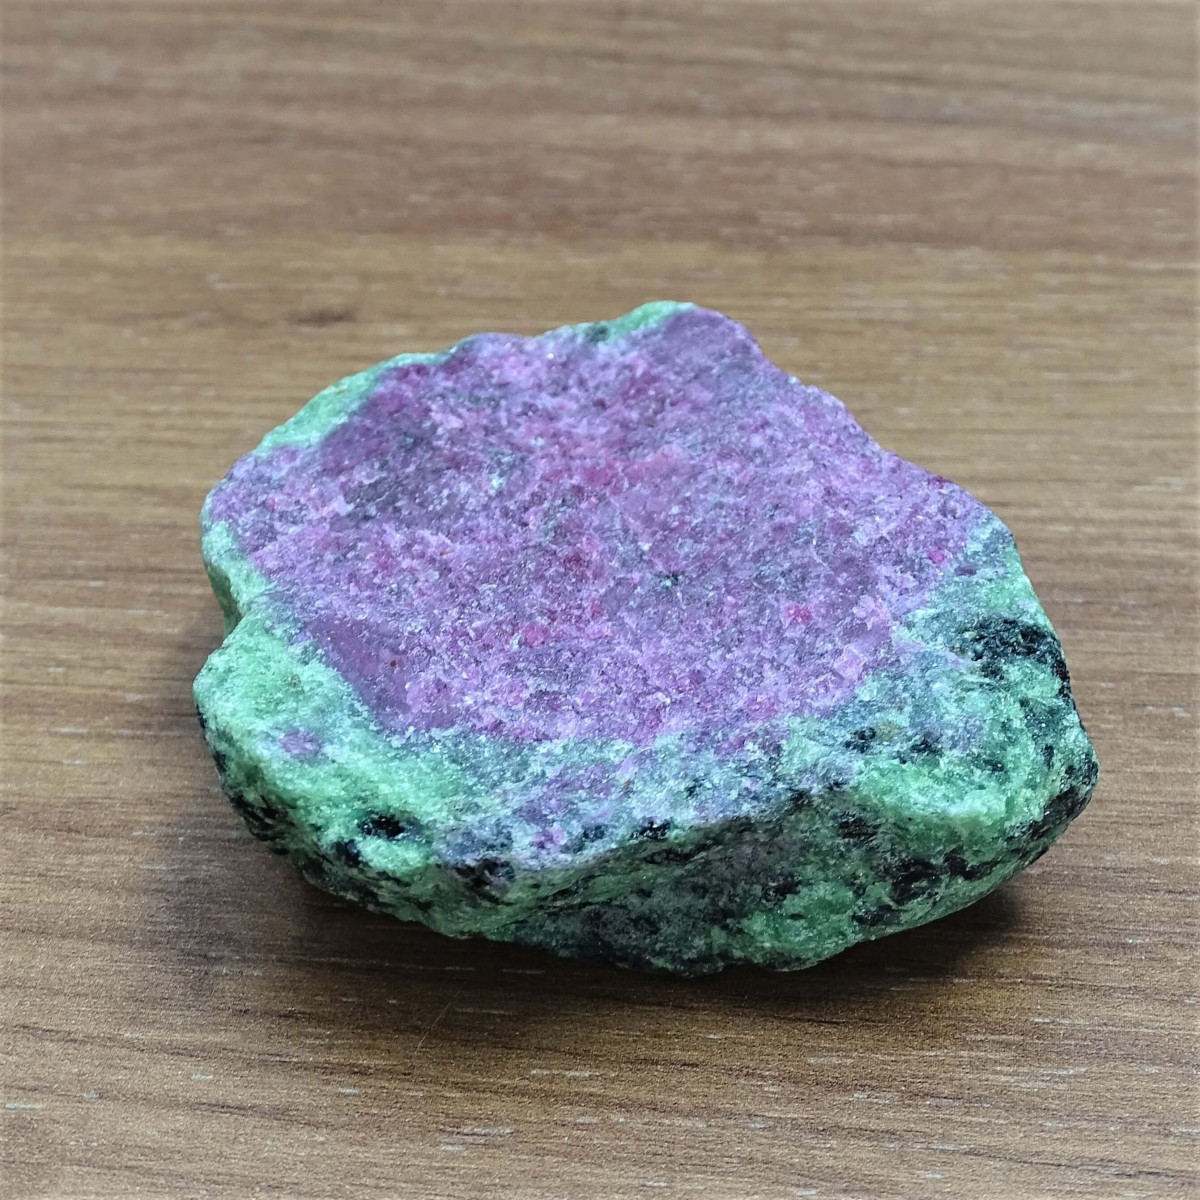 Ruby in zoisite 151g, Tanzania top quality